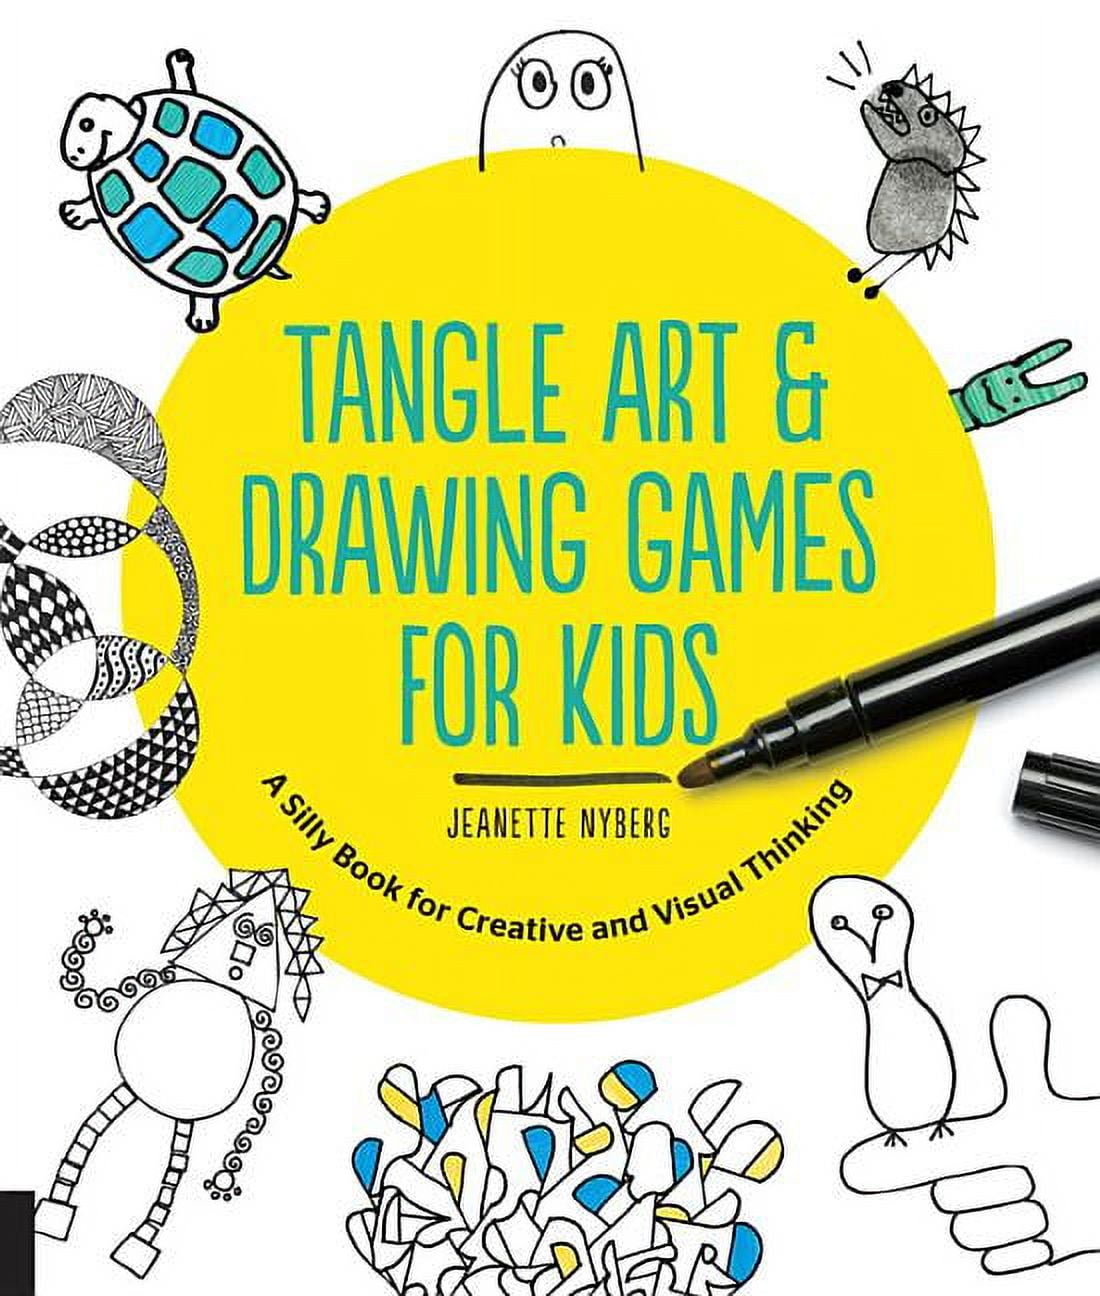 Tangle Art and Drawing Games for Kids: A Silly Book for Creative and Visual Thinking [Book]